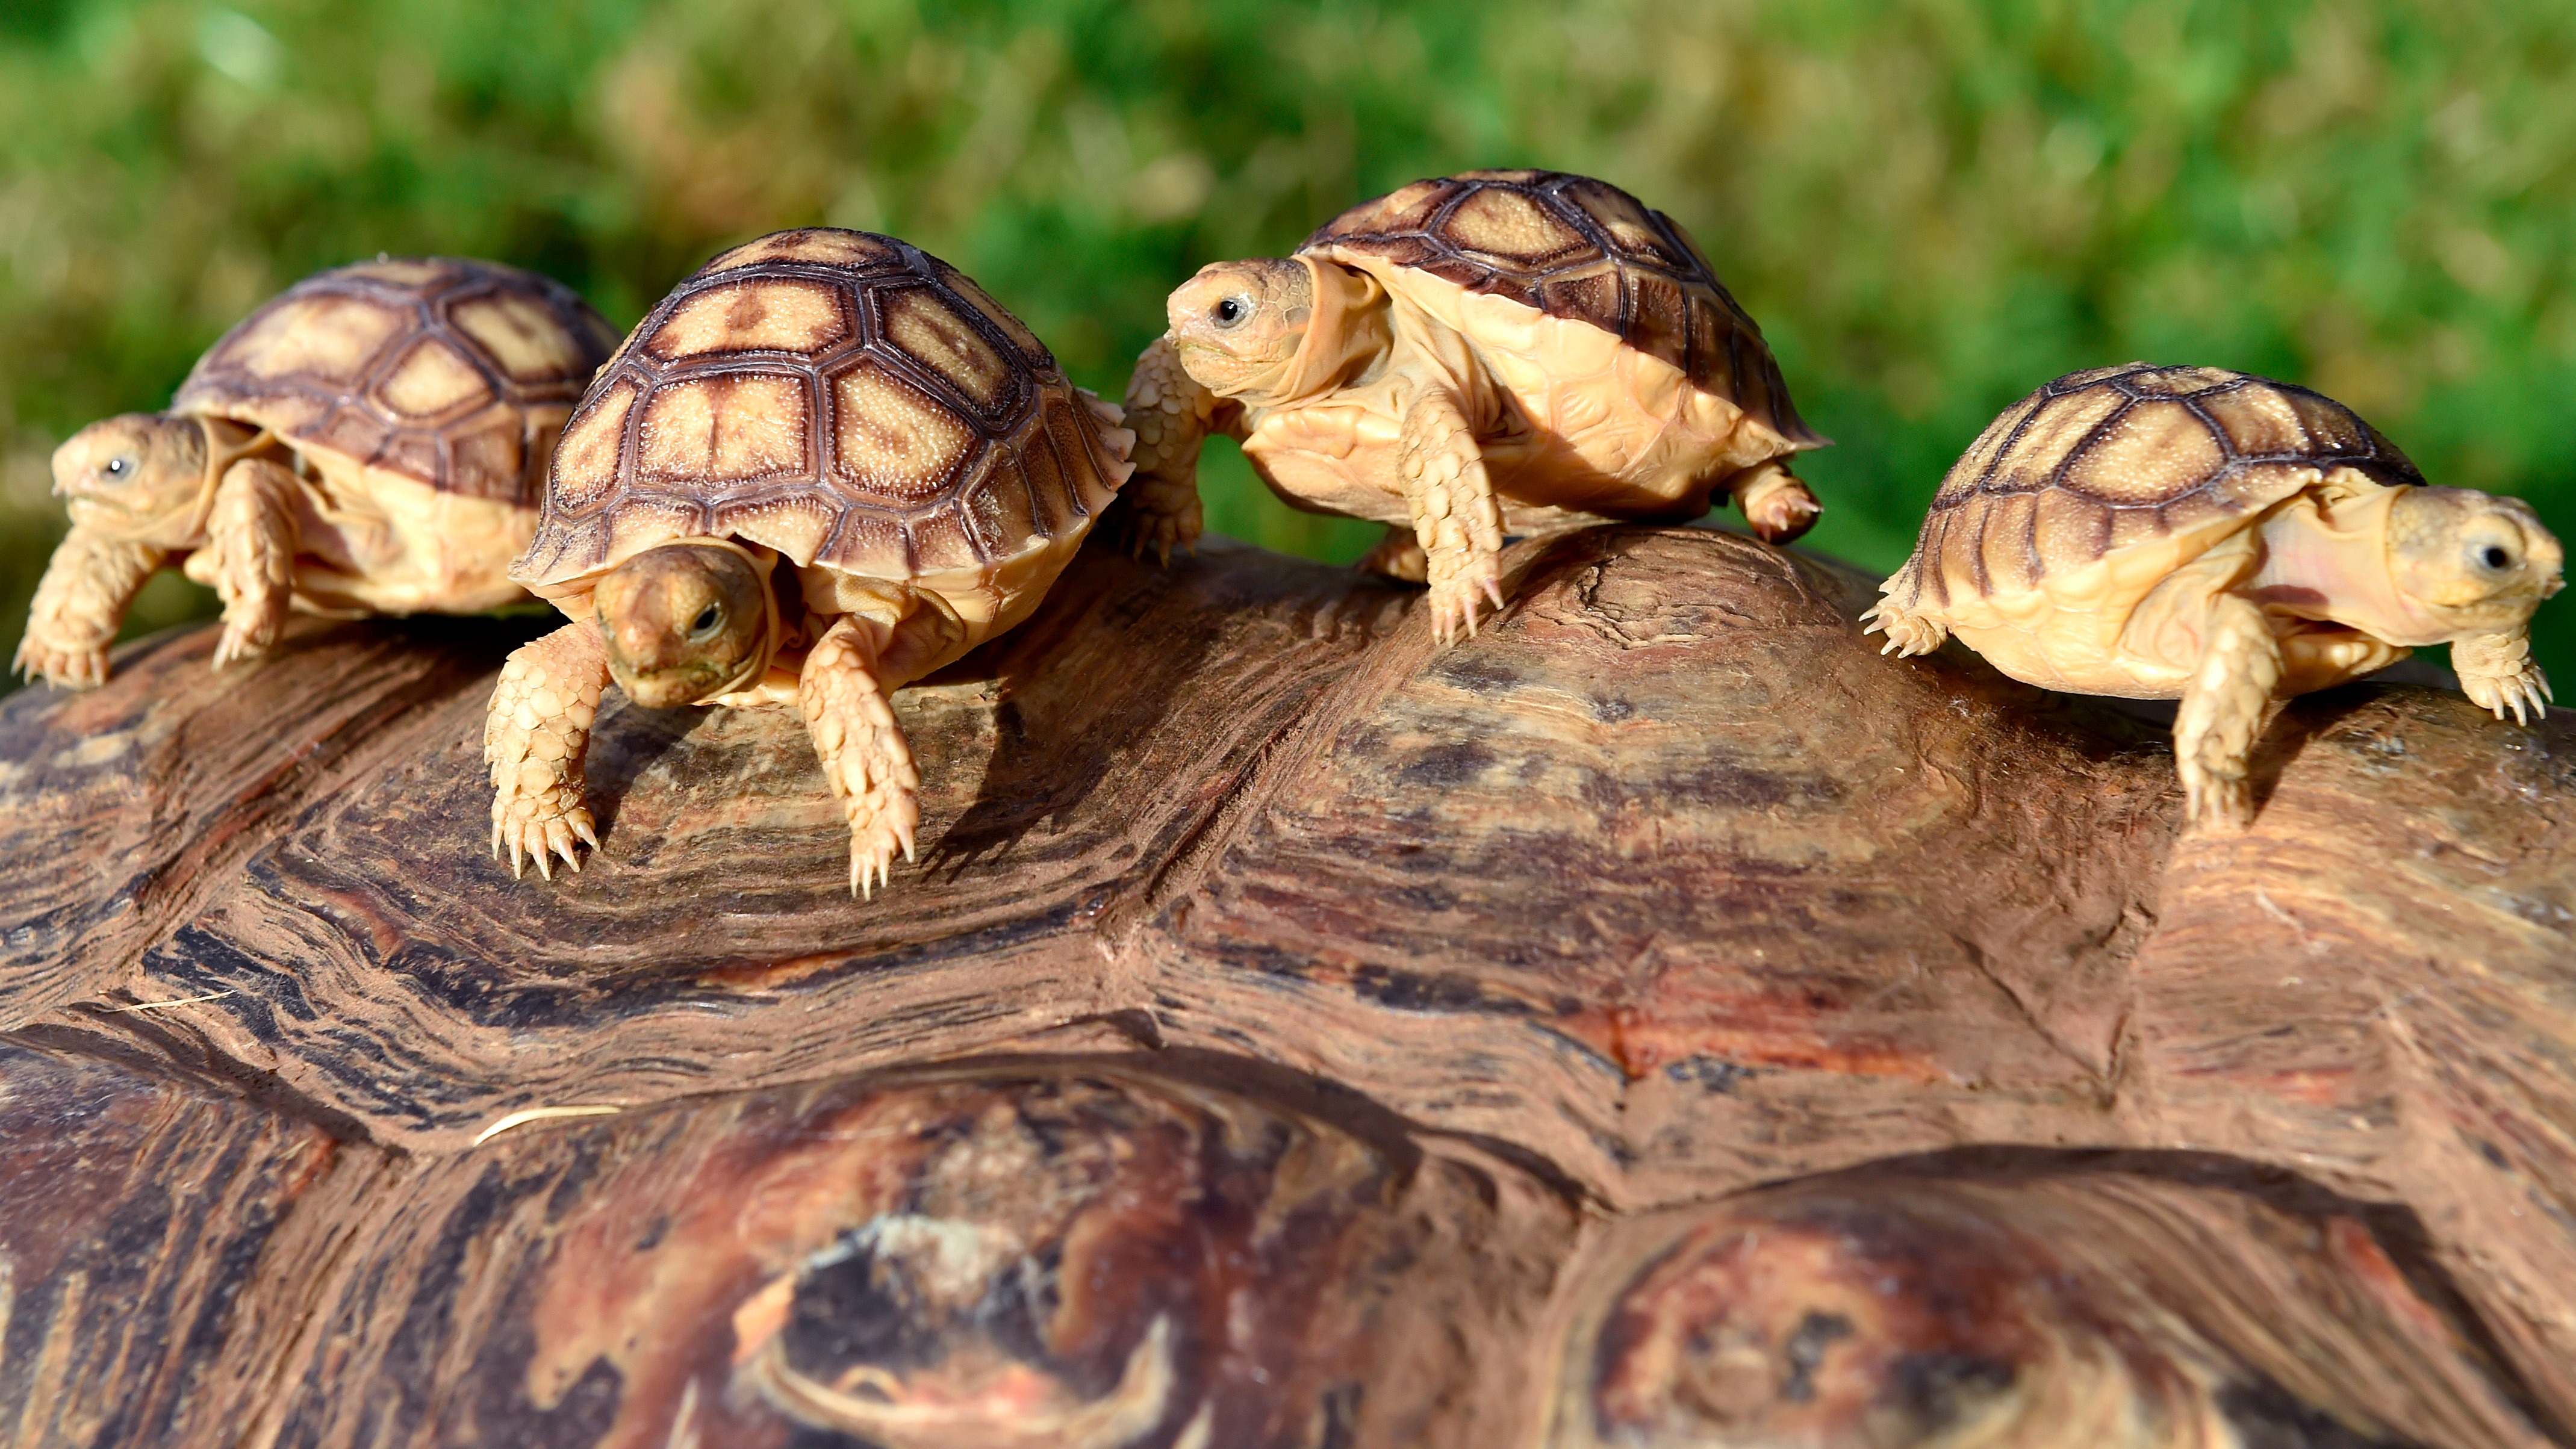 What is a group of tortoises called?